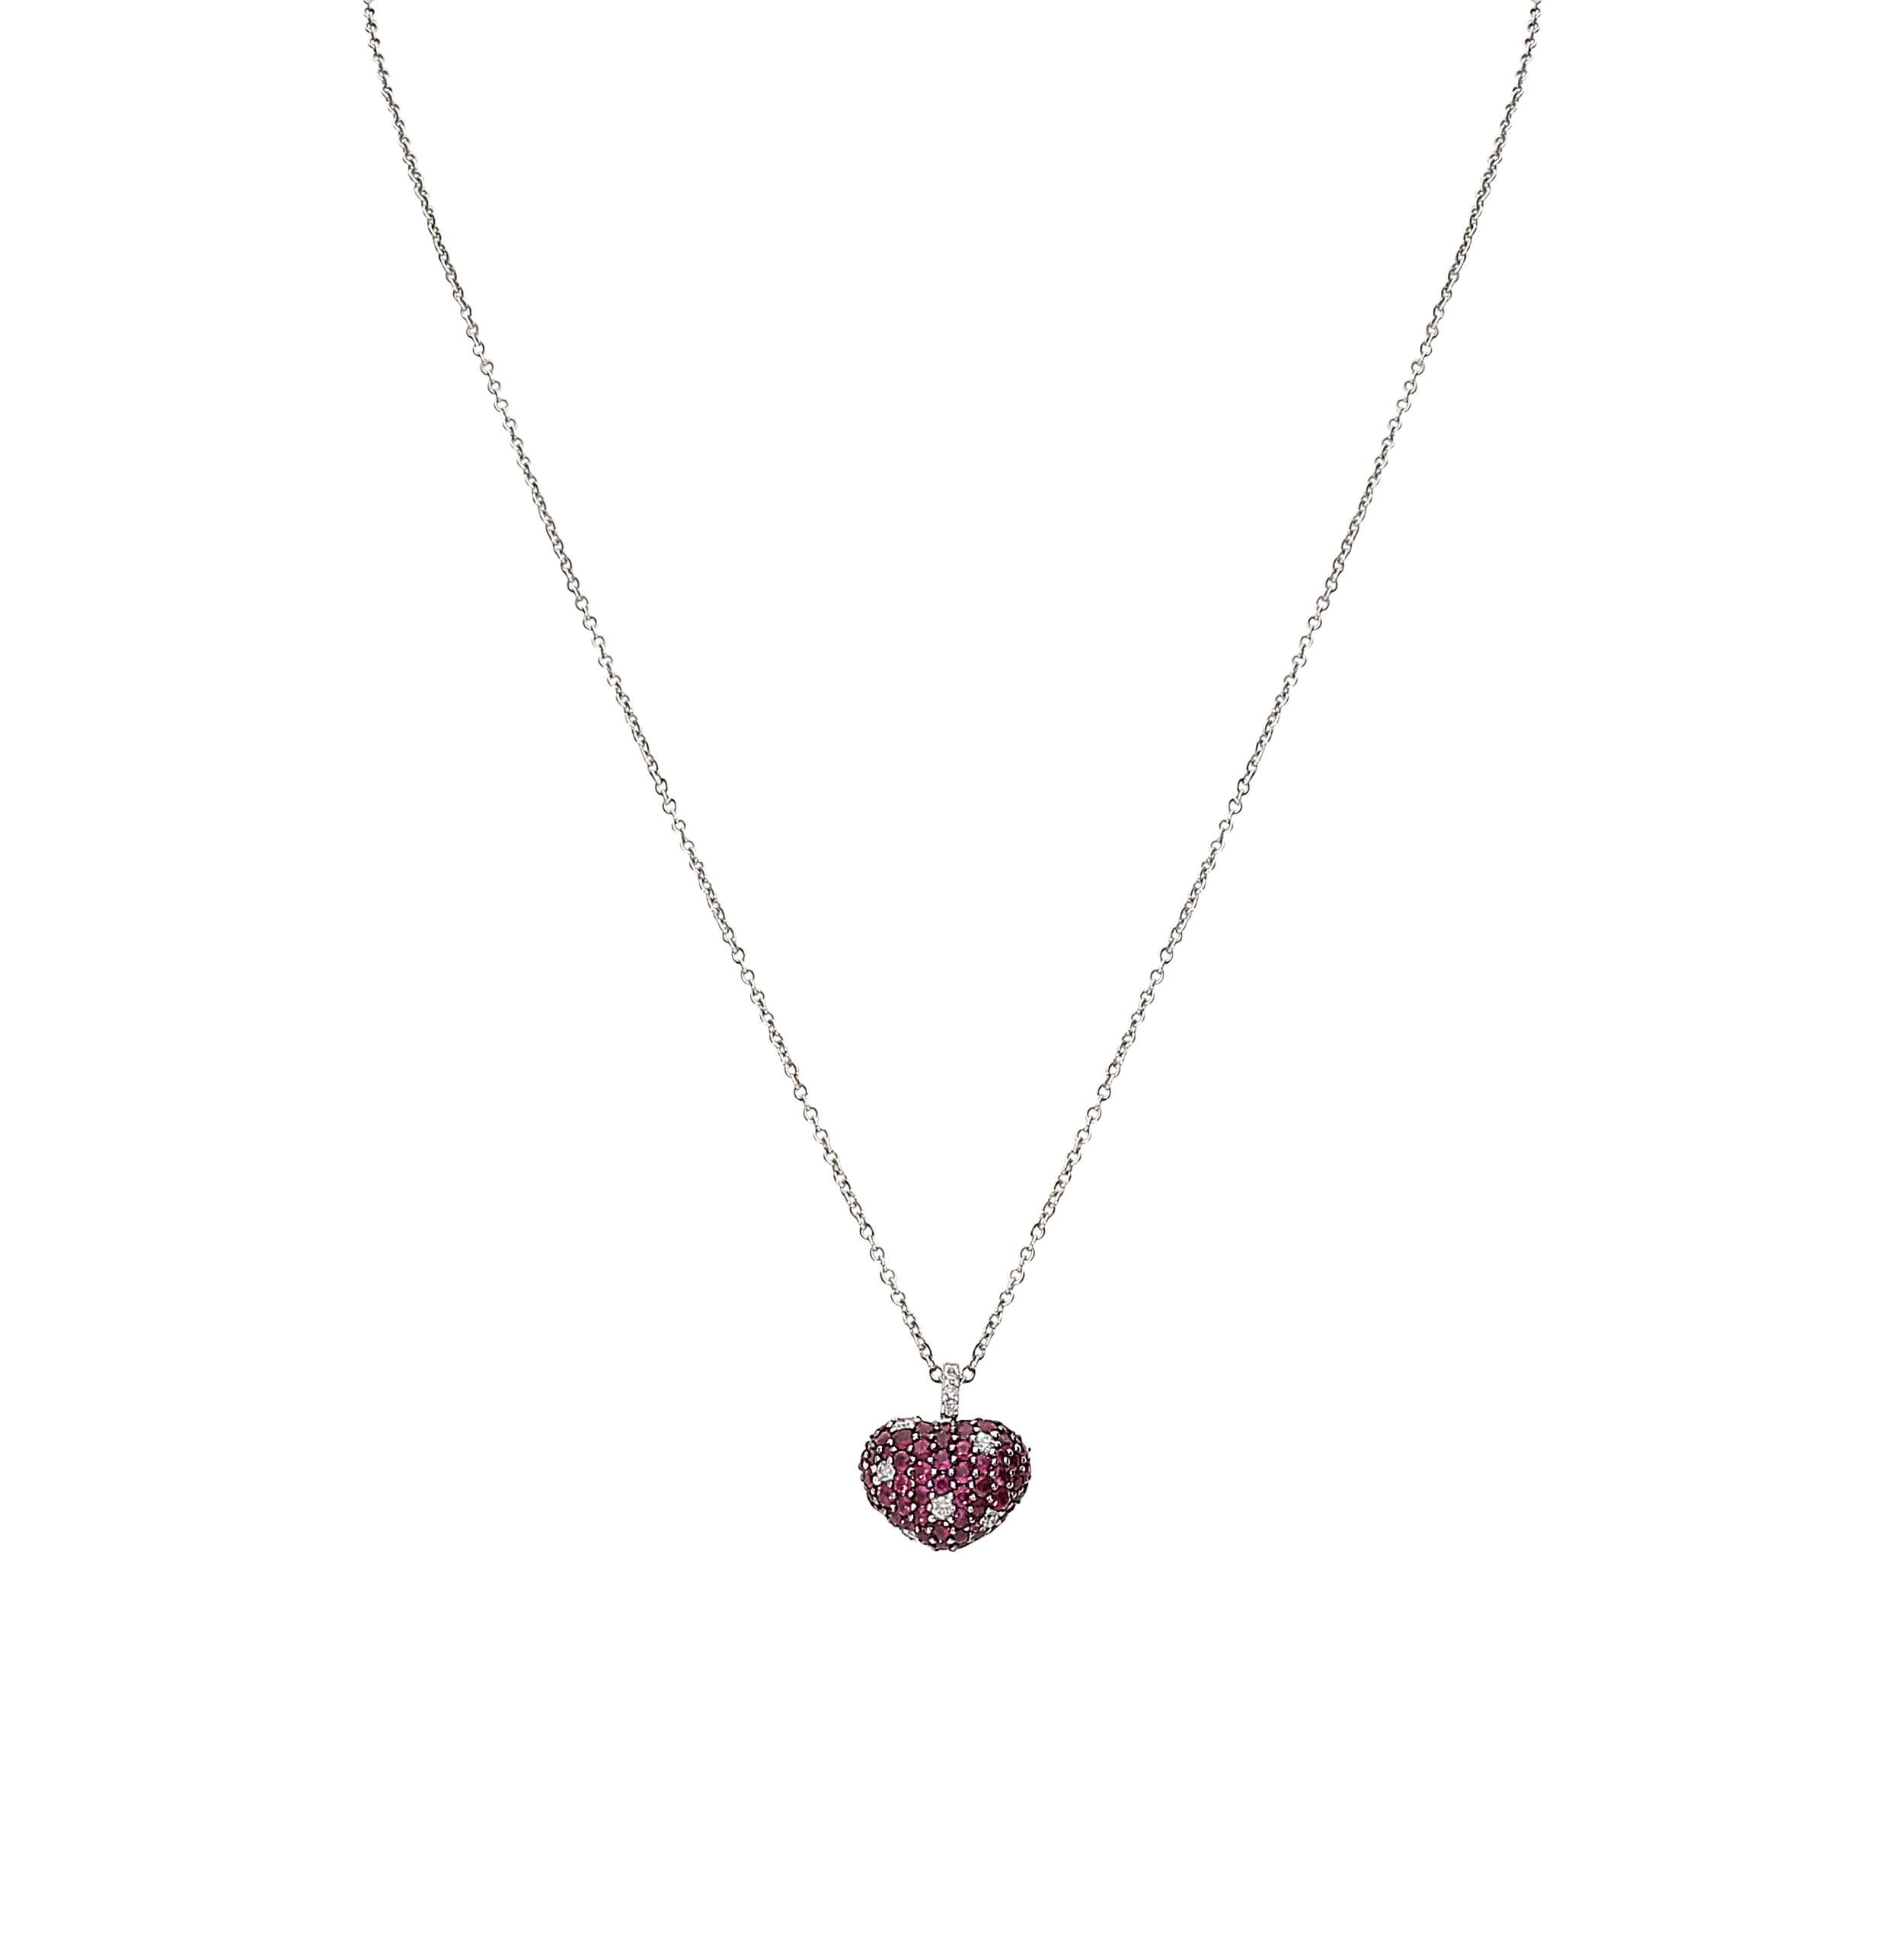 Adorable heart shaped pendant with chain in 18kt white gold for 4,10 grams, 0,27 carat of white round brilliant diamonds color G clarity VS and 1,90 carats of rubies.
The chain is 43 centimeter long and has got an adjustment ring at 40 centimeters,